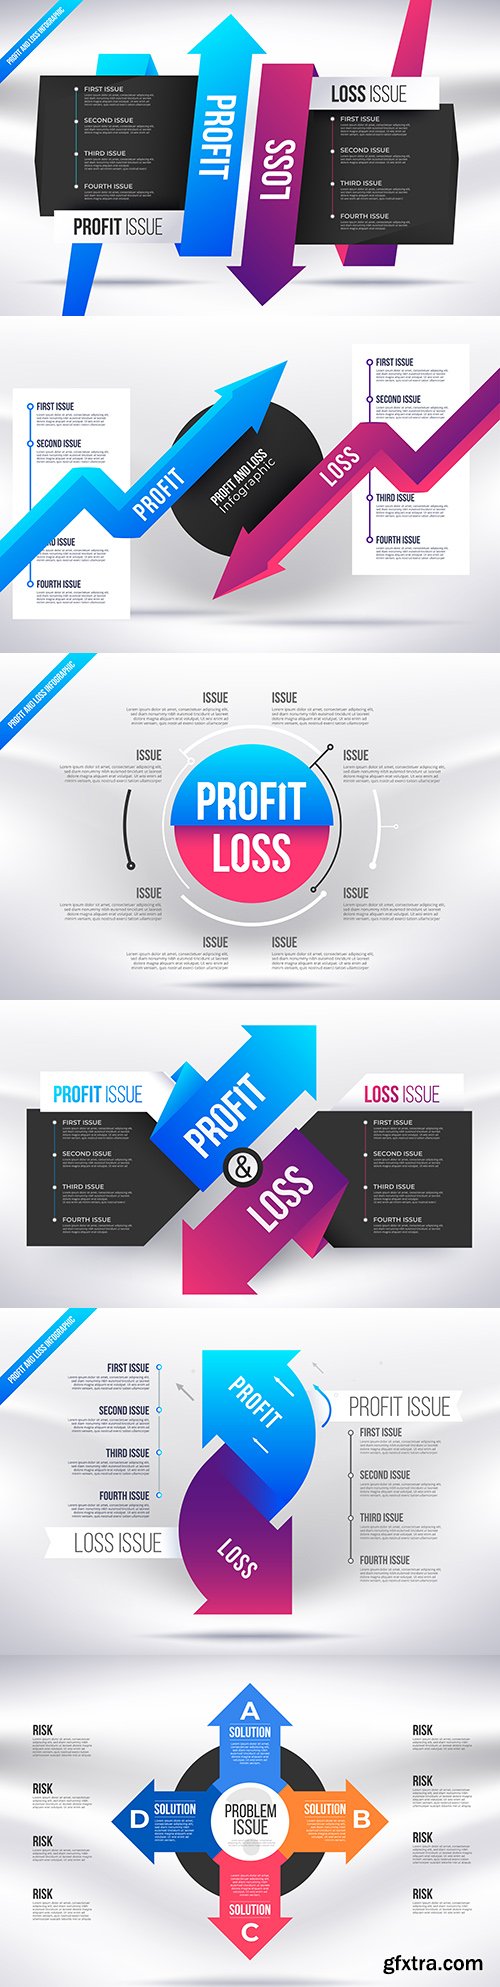 Profit and loss infographic simple business presentation
